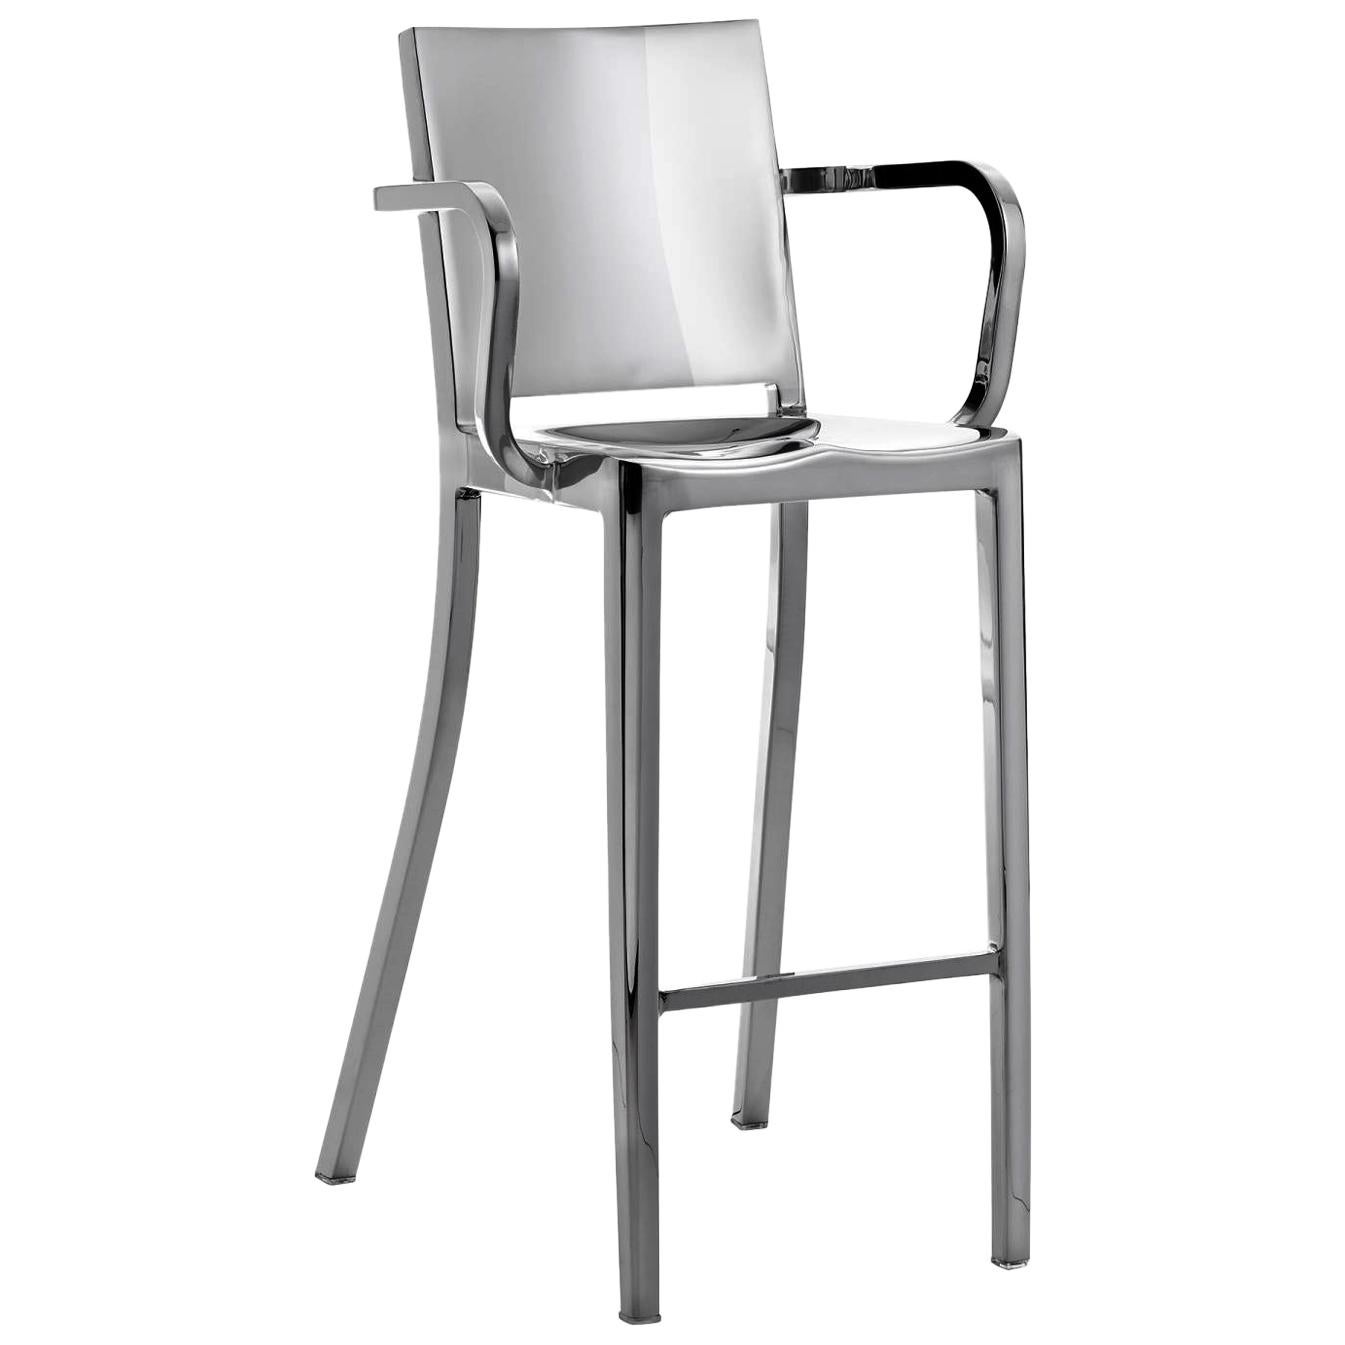 Emeco Hudson Barstool w/ Arms in Polished Aluminum by Philippe Starck